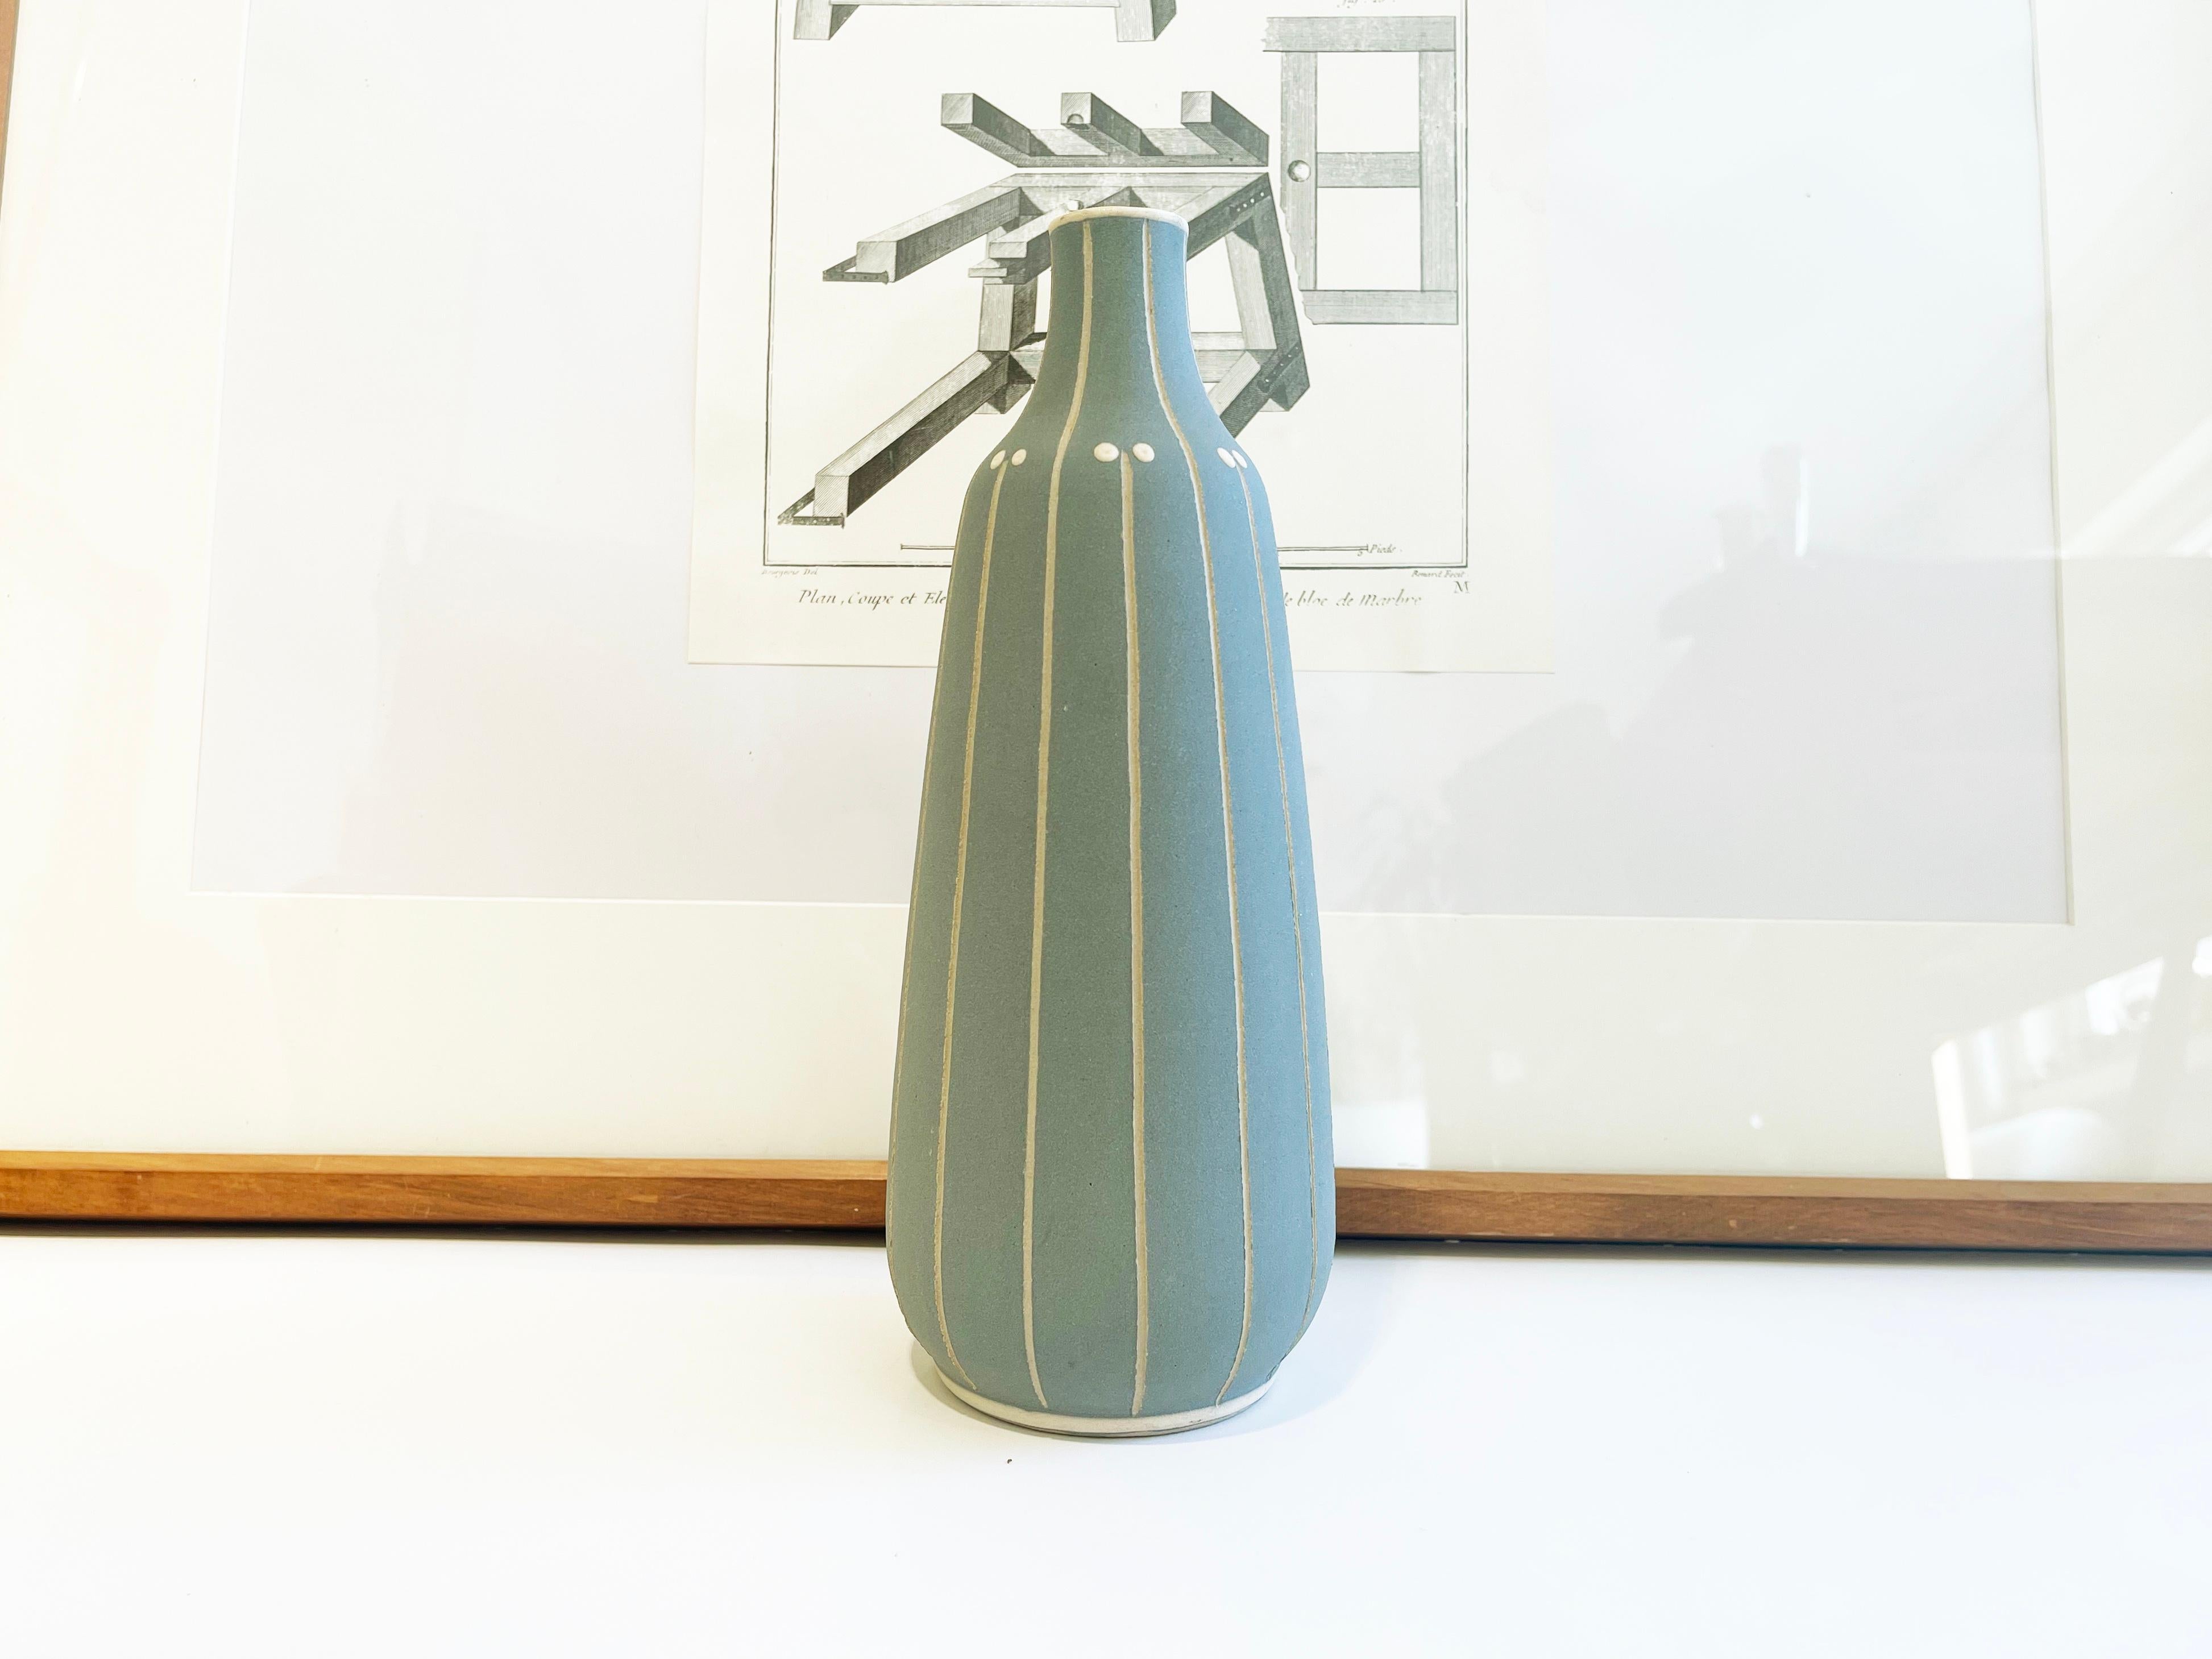 Absolutely rare piece & fantastic art deco shape and design by Carl Fischer from the late 20s to 30s.
Minimalist, abstract & boldly playful.
The ceramic comes in a completely rough matte finish of pastel turquoise/light blue, with incised natural